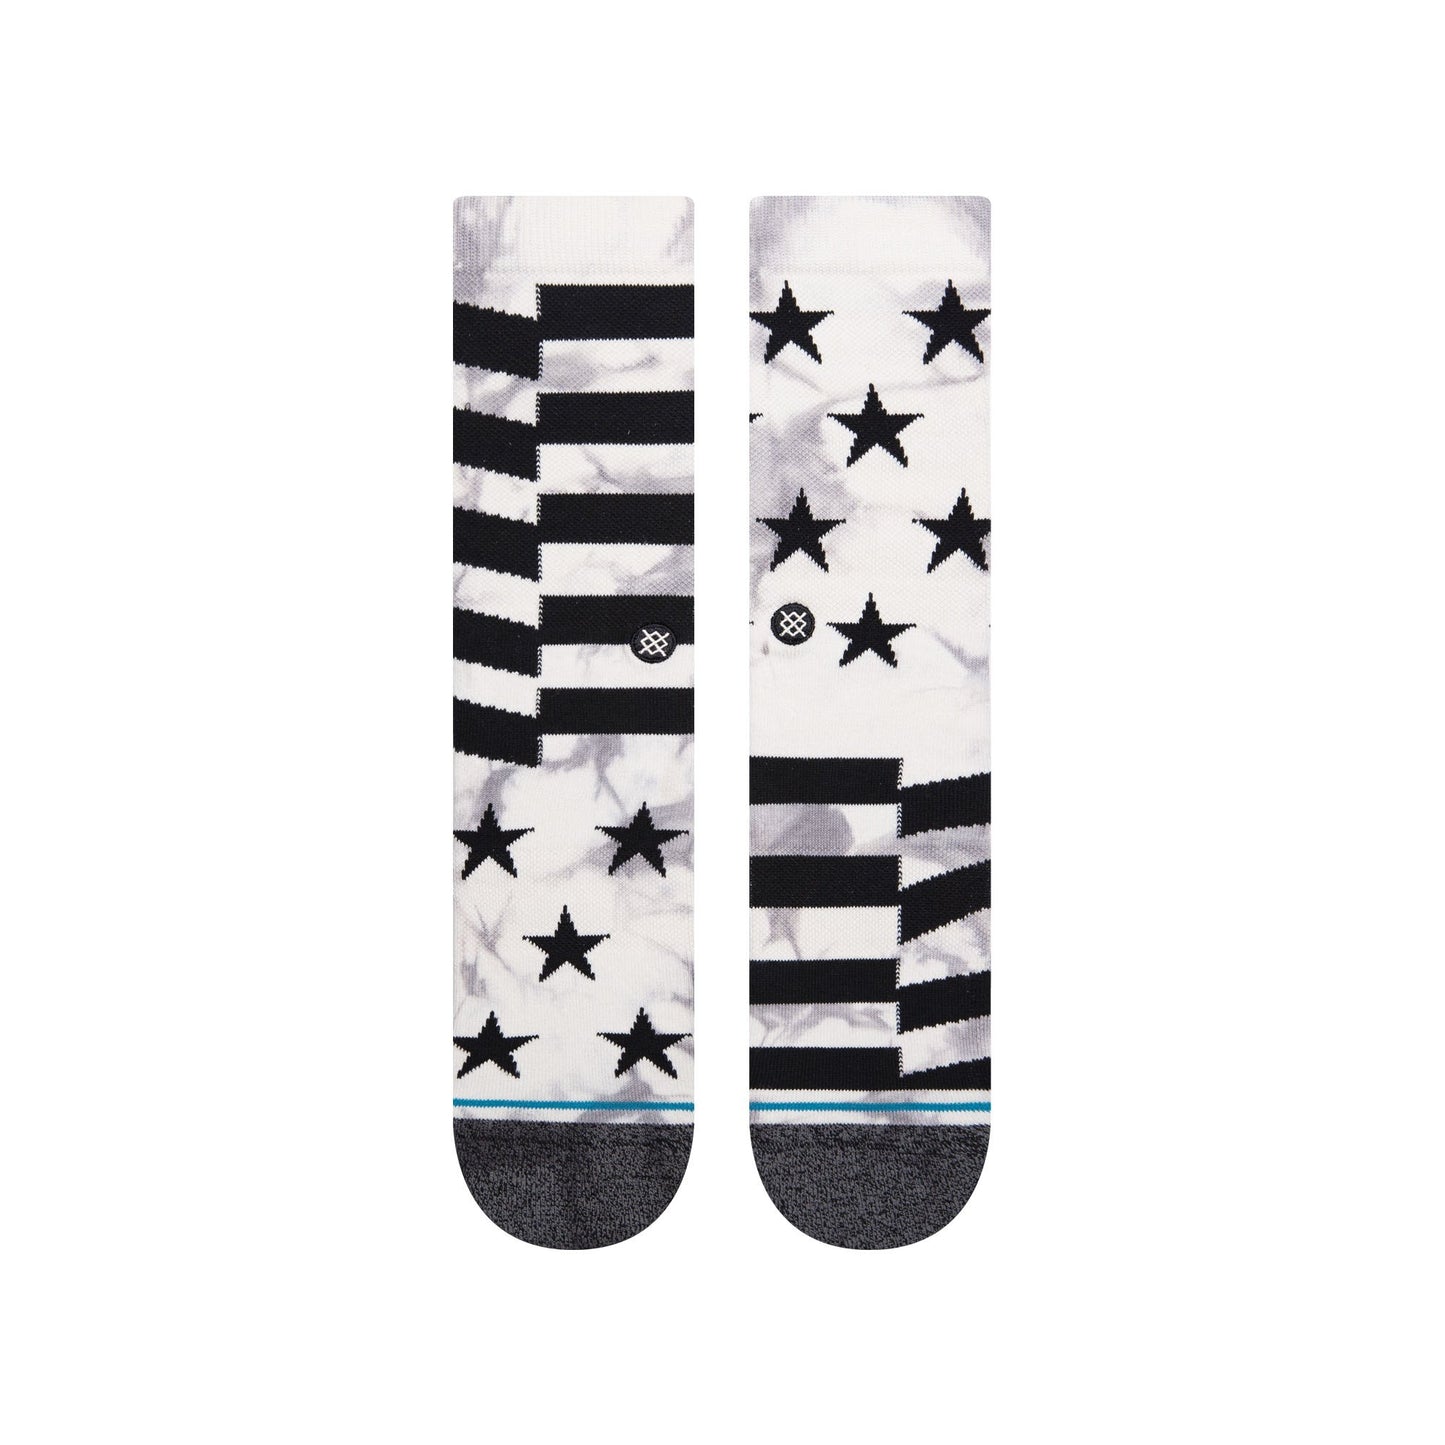 Chaussettes Stance - SIDEREAL 2 - Gris